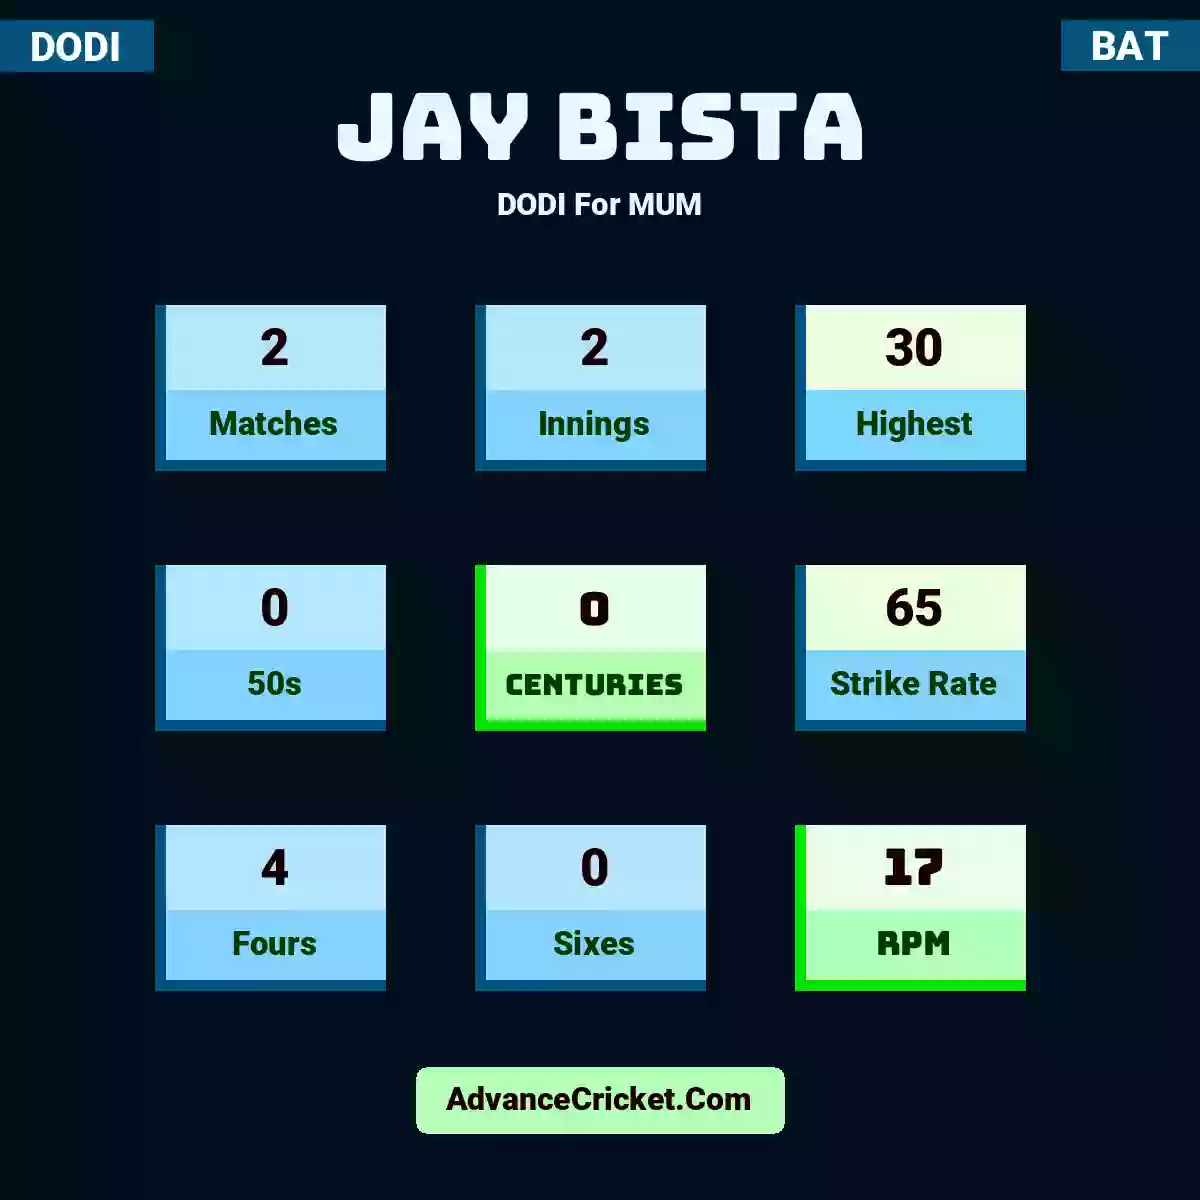 Jay Bista DODI  For MUM, Jay Bista played 2 matches, scored 30 runs as highest, 0 half-centuries, and 0 centuries, with a strike rate of 65. J.Bista hit 4 fours and 0 sixes, with an RPM of 17.